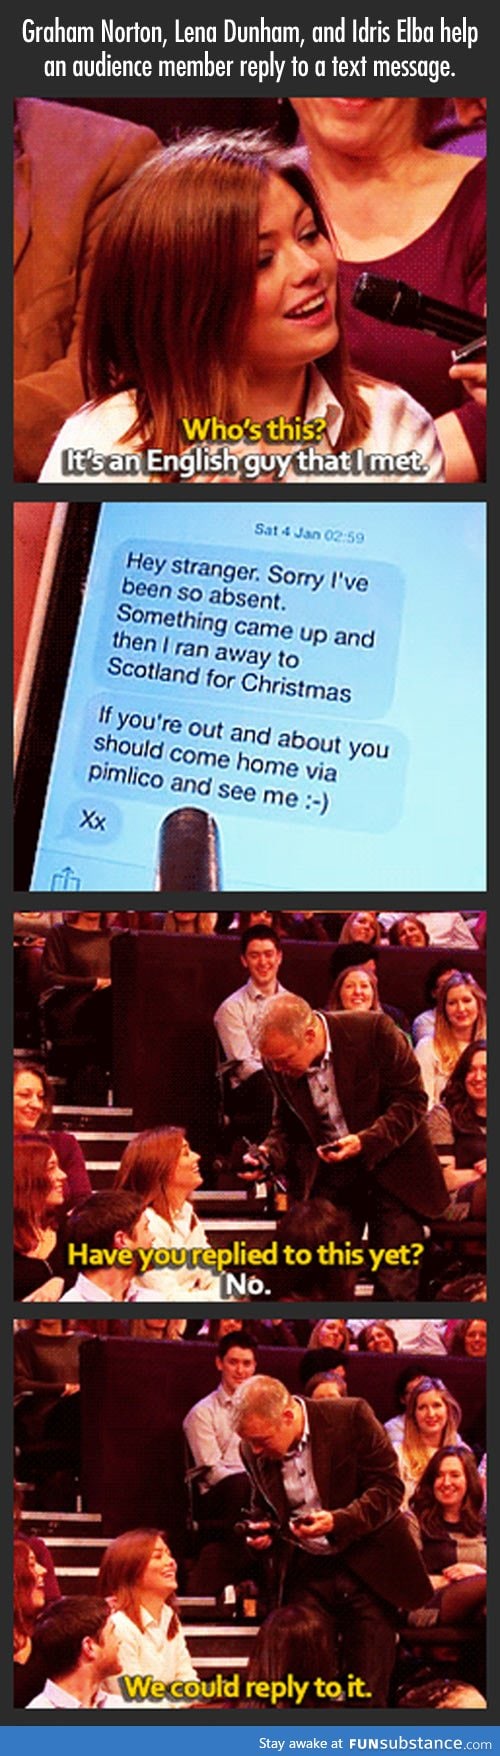 Helping an audience member reply to a text message